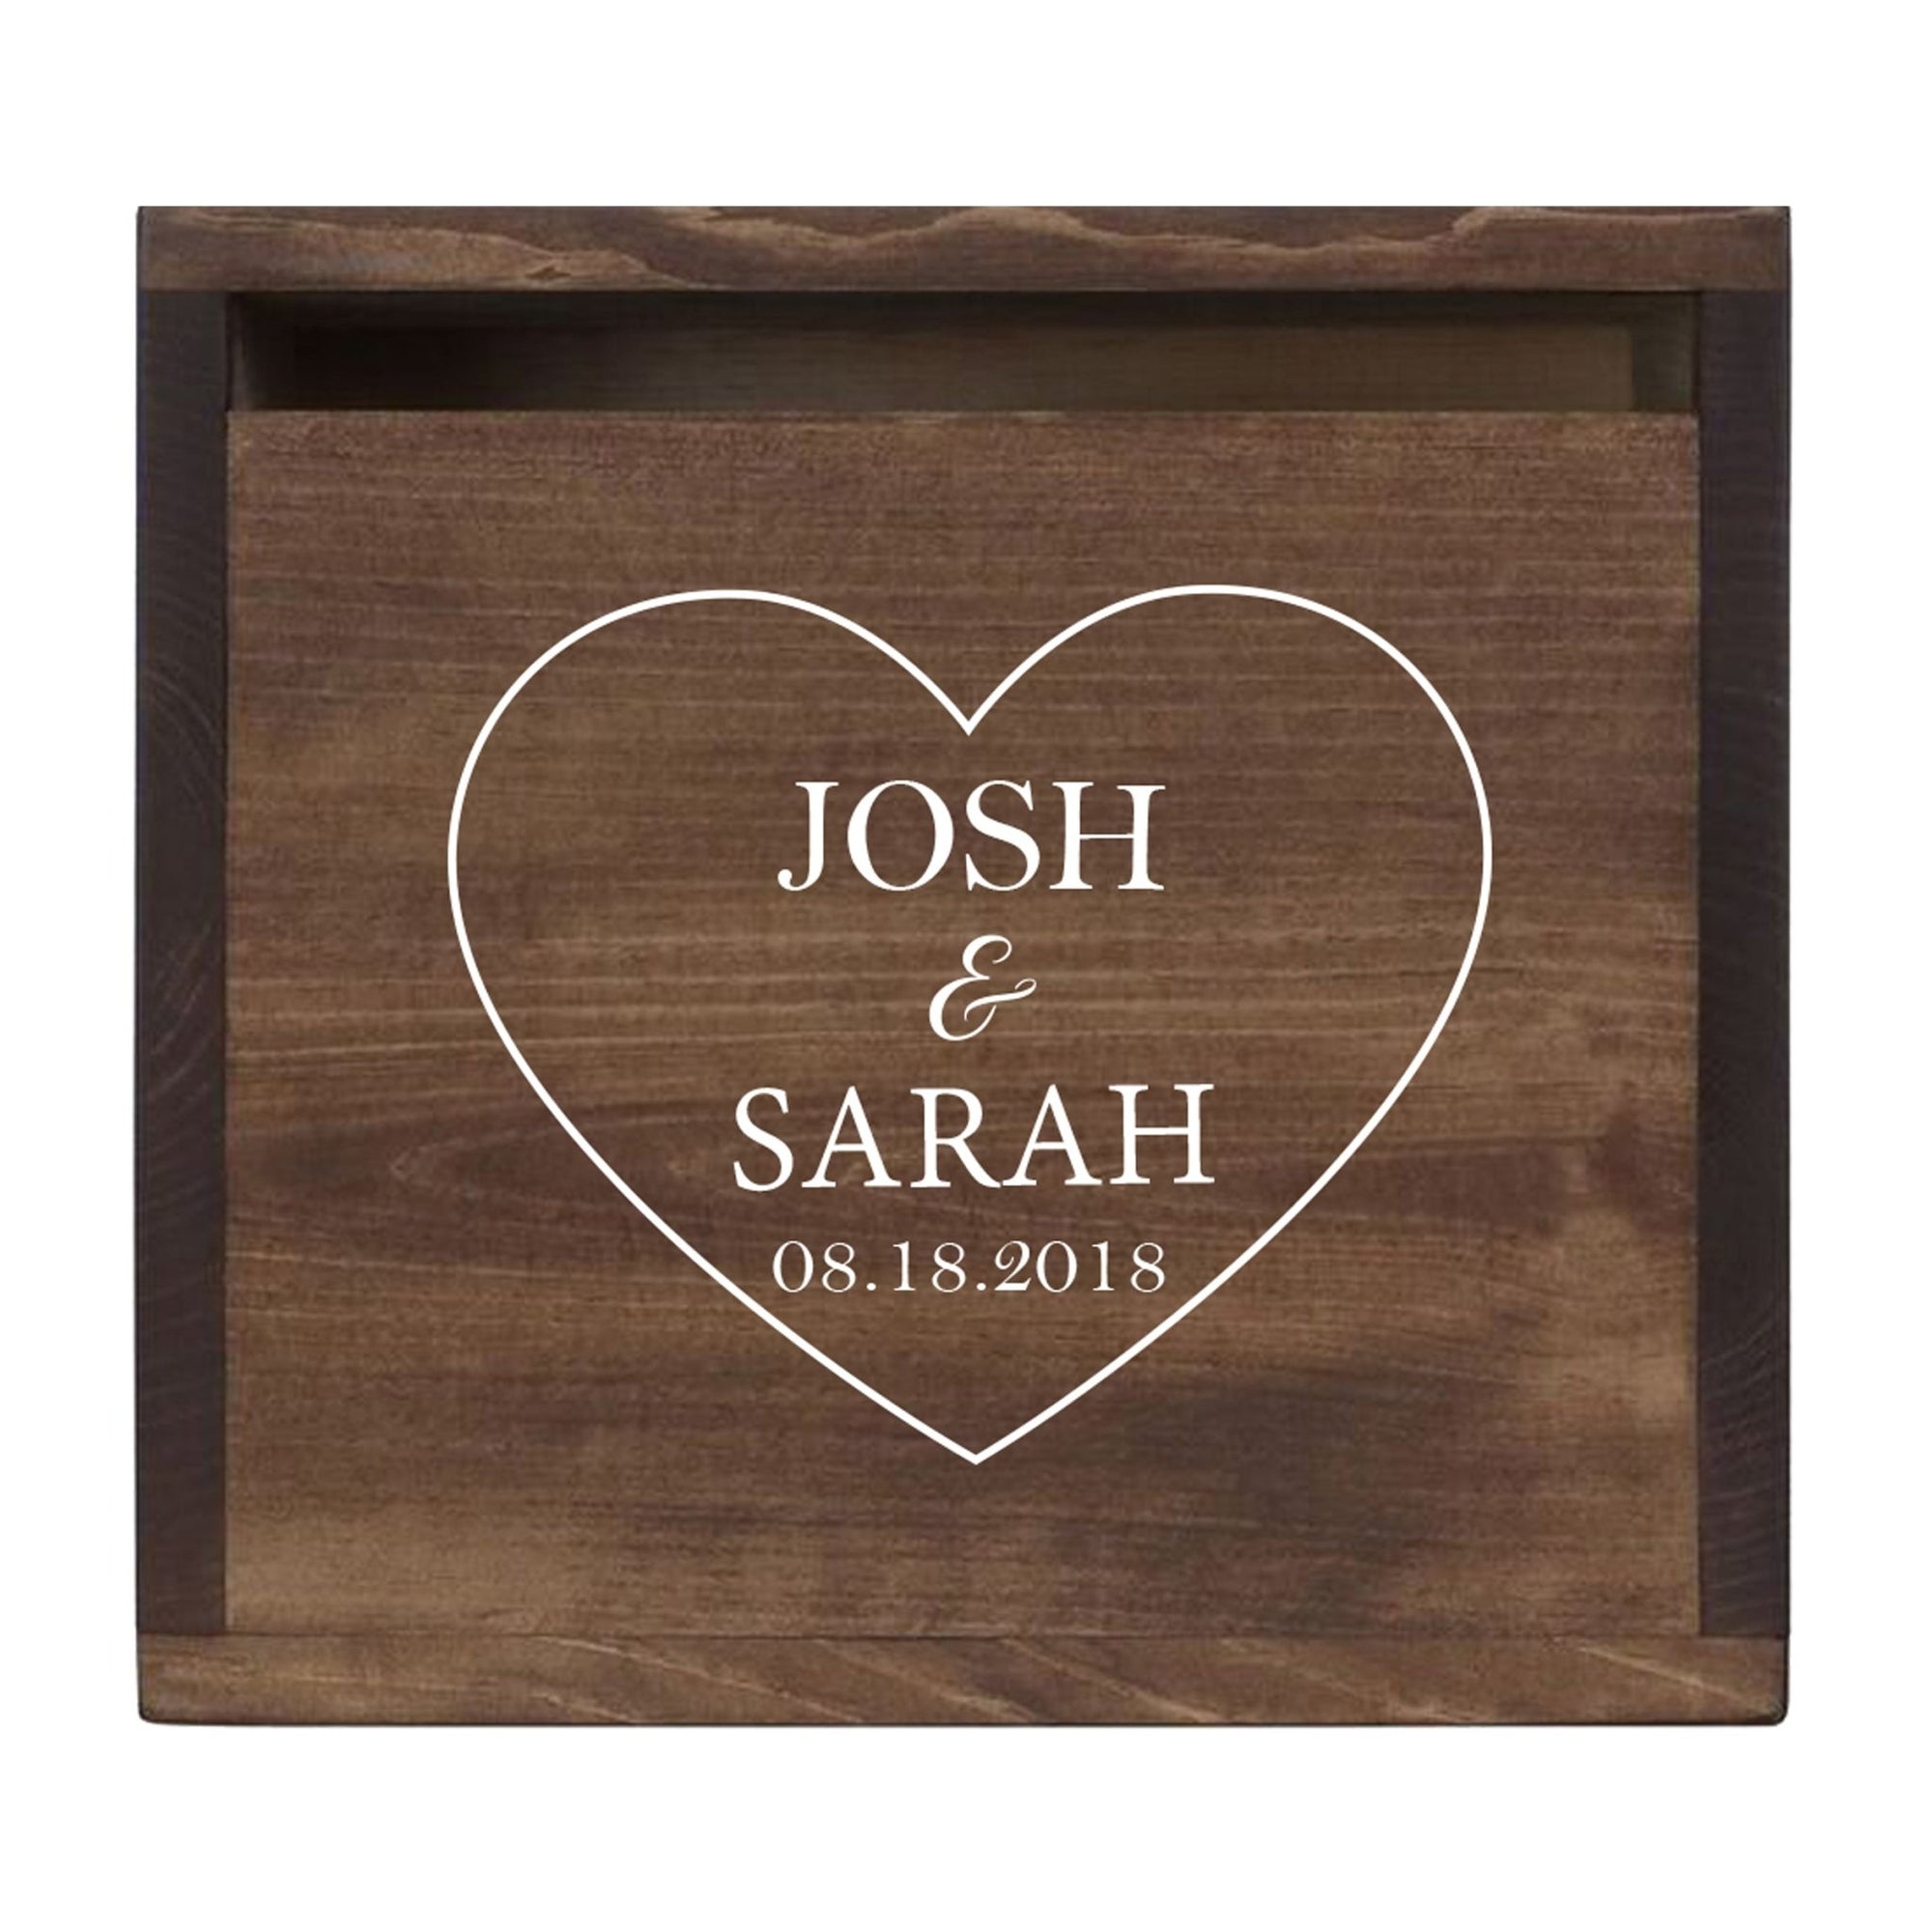 Personalized Wooden Card Box for Wedding Ceremonies, Venues, Receptions, Bridal Showers, and Engagement Parties 13.5x12 - Josh & Sarah (Heart) - LifeSong Milestones